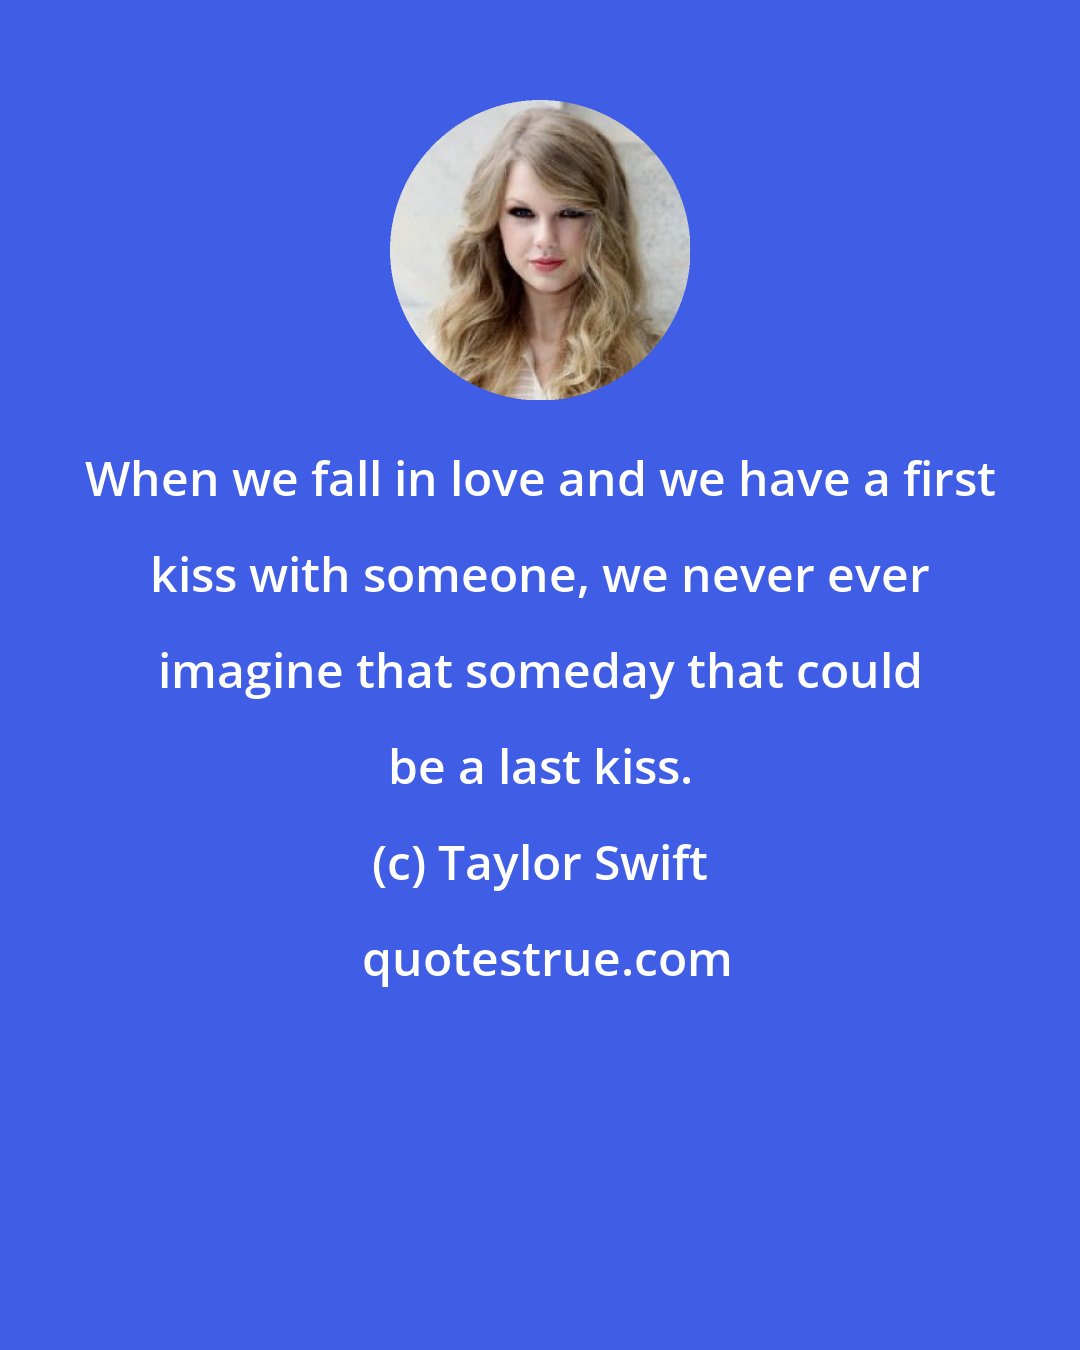 Taylor Swift: When we fall in love and we have a first kiss with someone, we never ever imagine that someday that could be a last kiss.